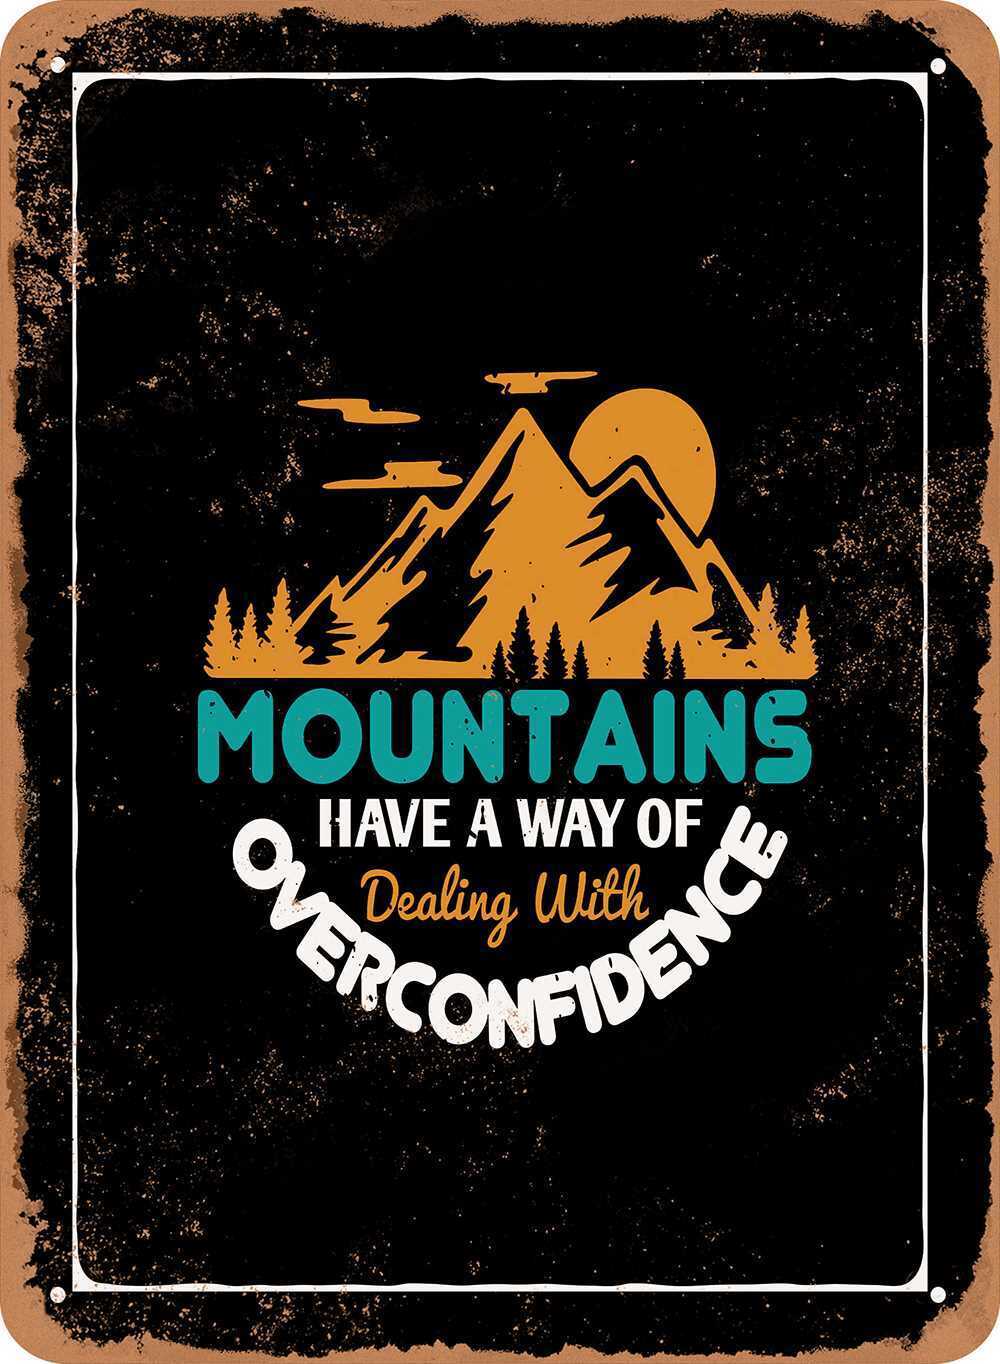 Metal Sign - Mountains Have a Way of Dealing With Overconfidence - Vintage Look